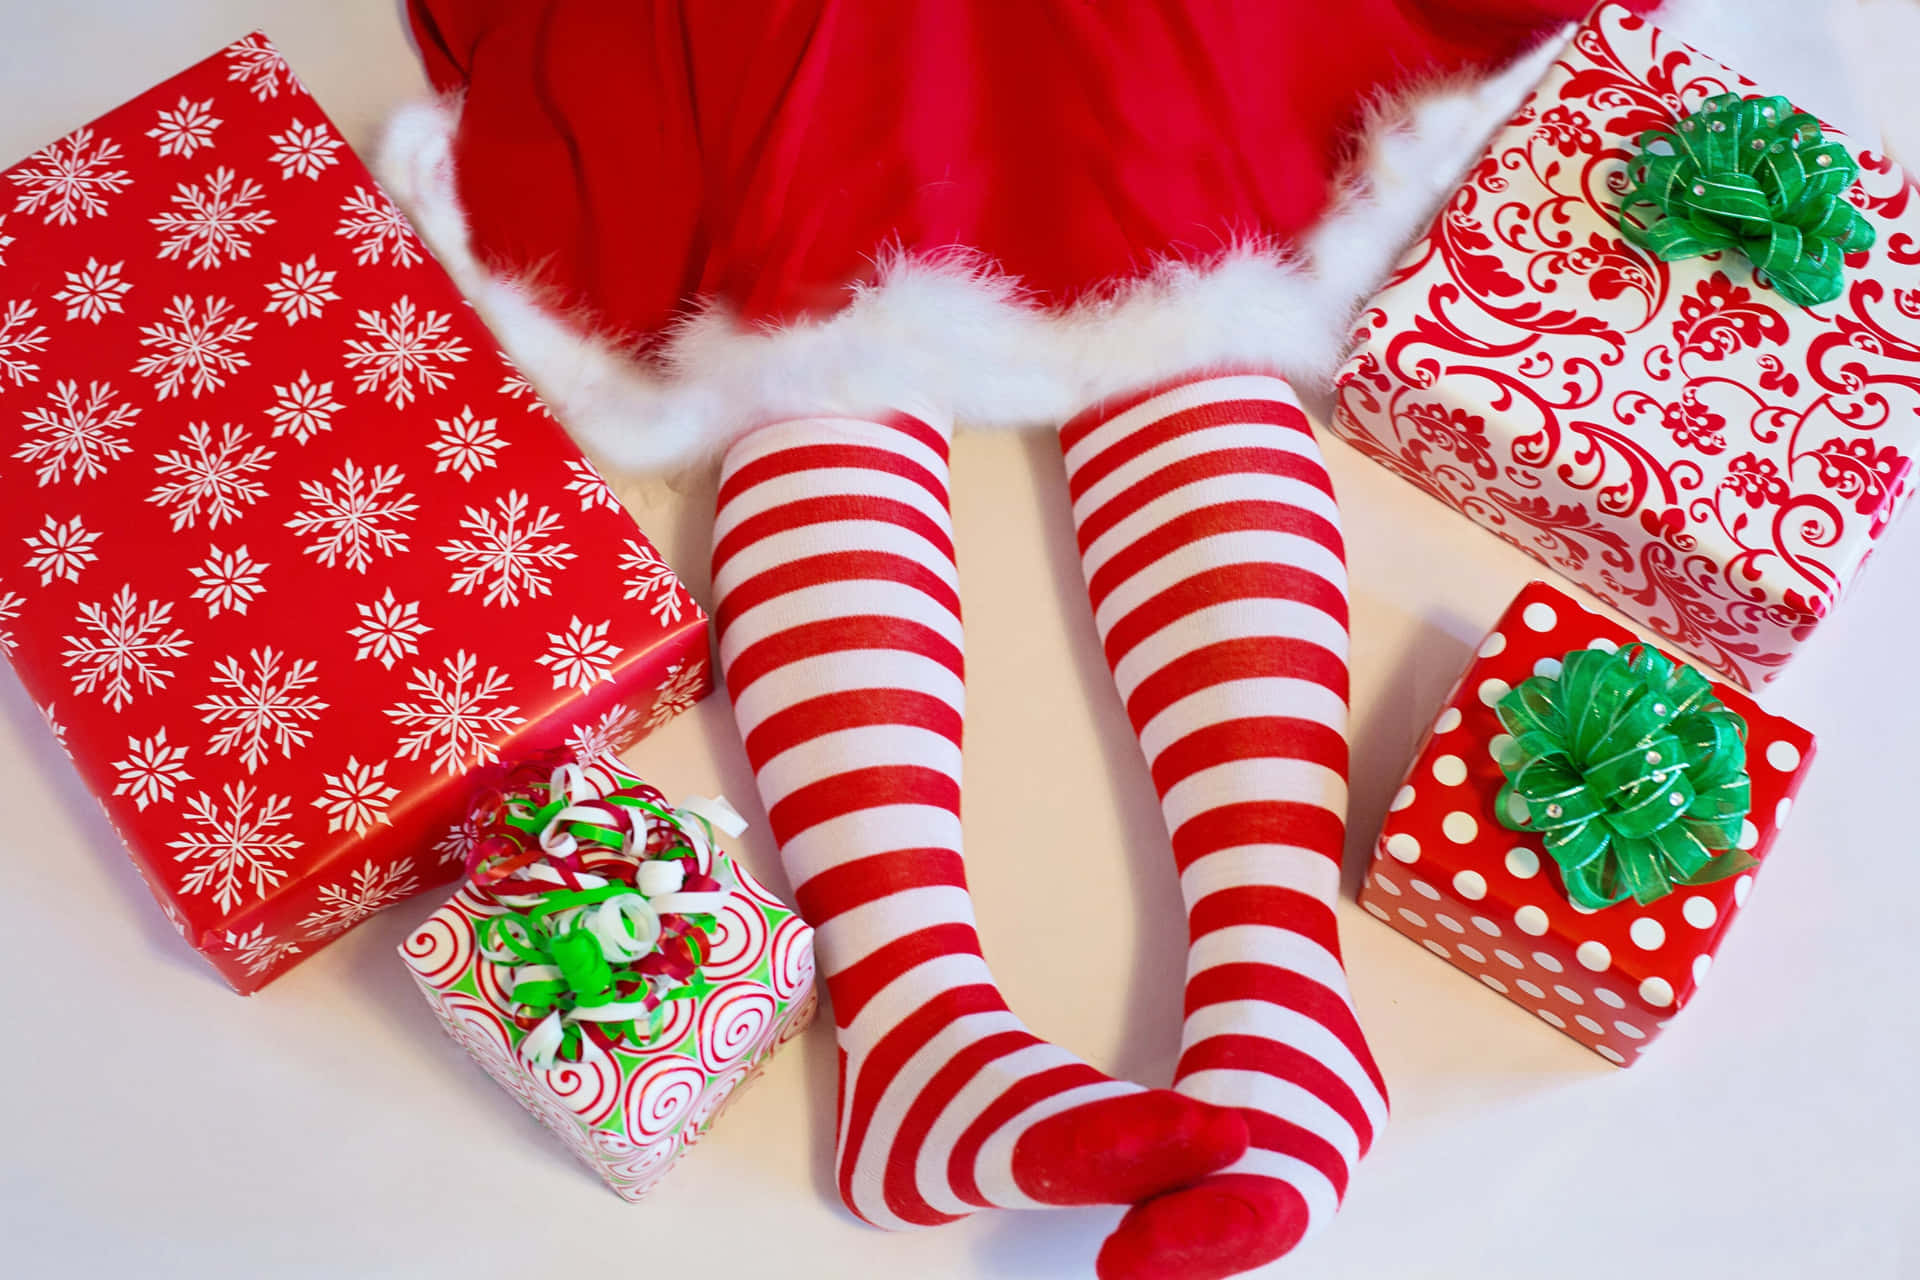 Santa Striped Legs With Gifts.jpg